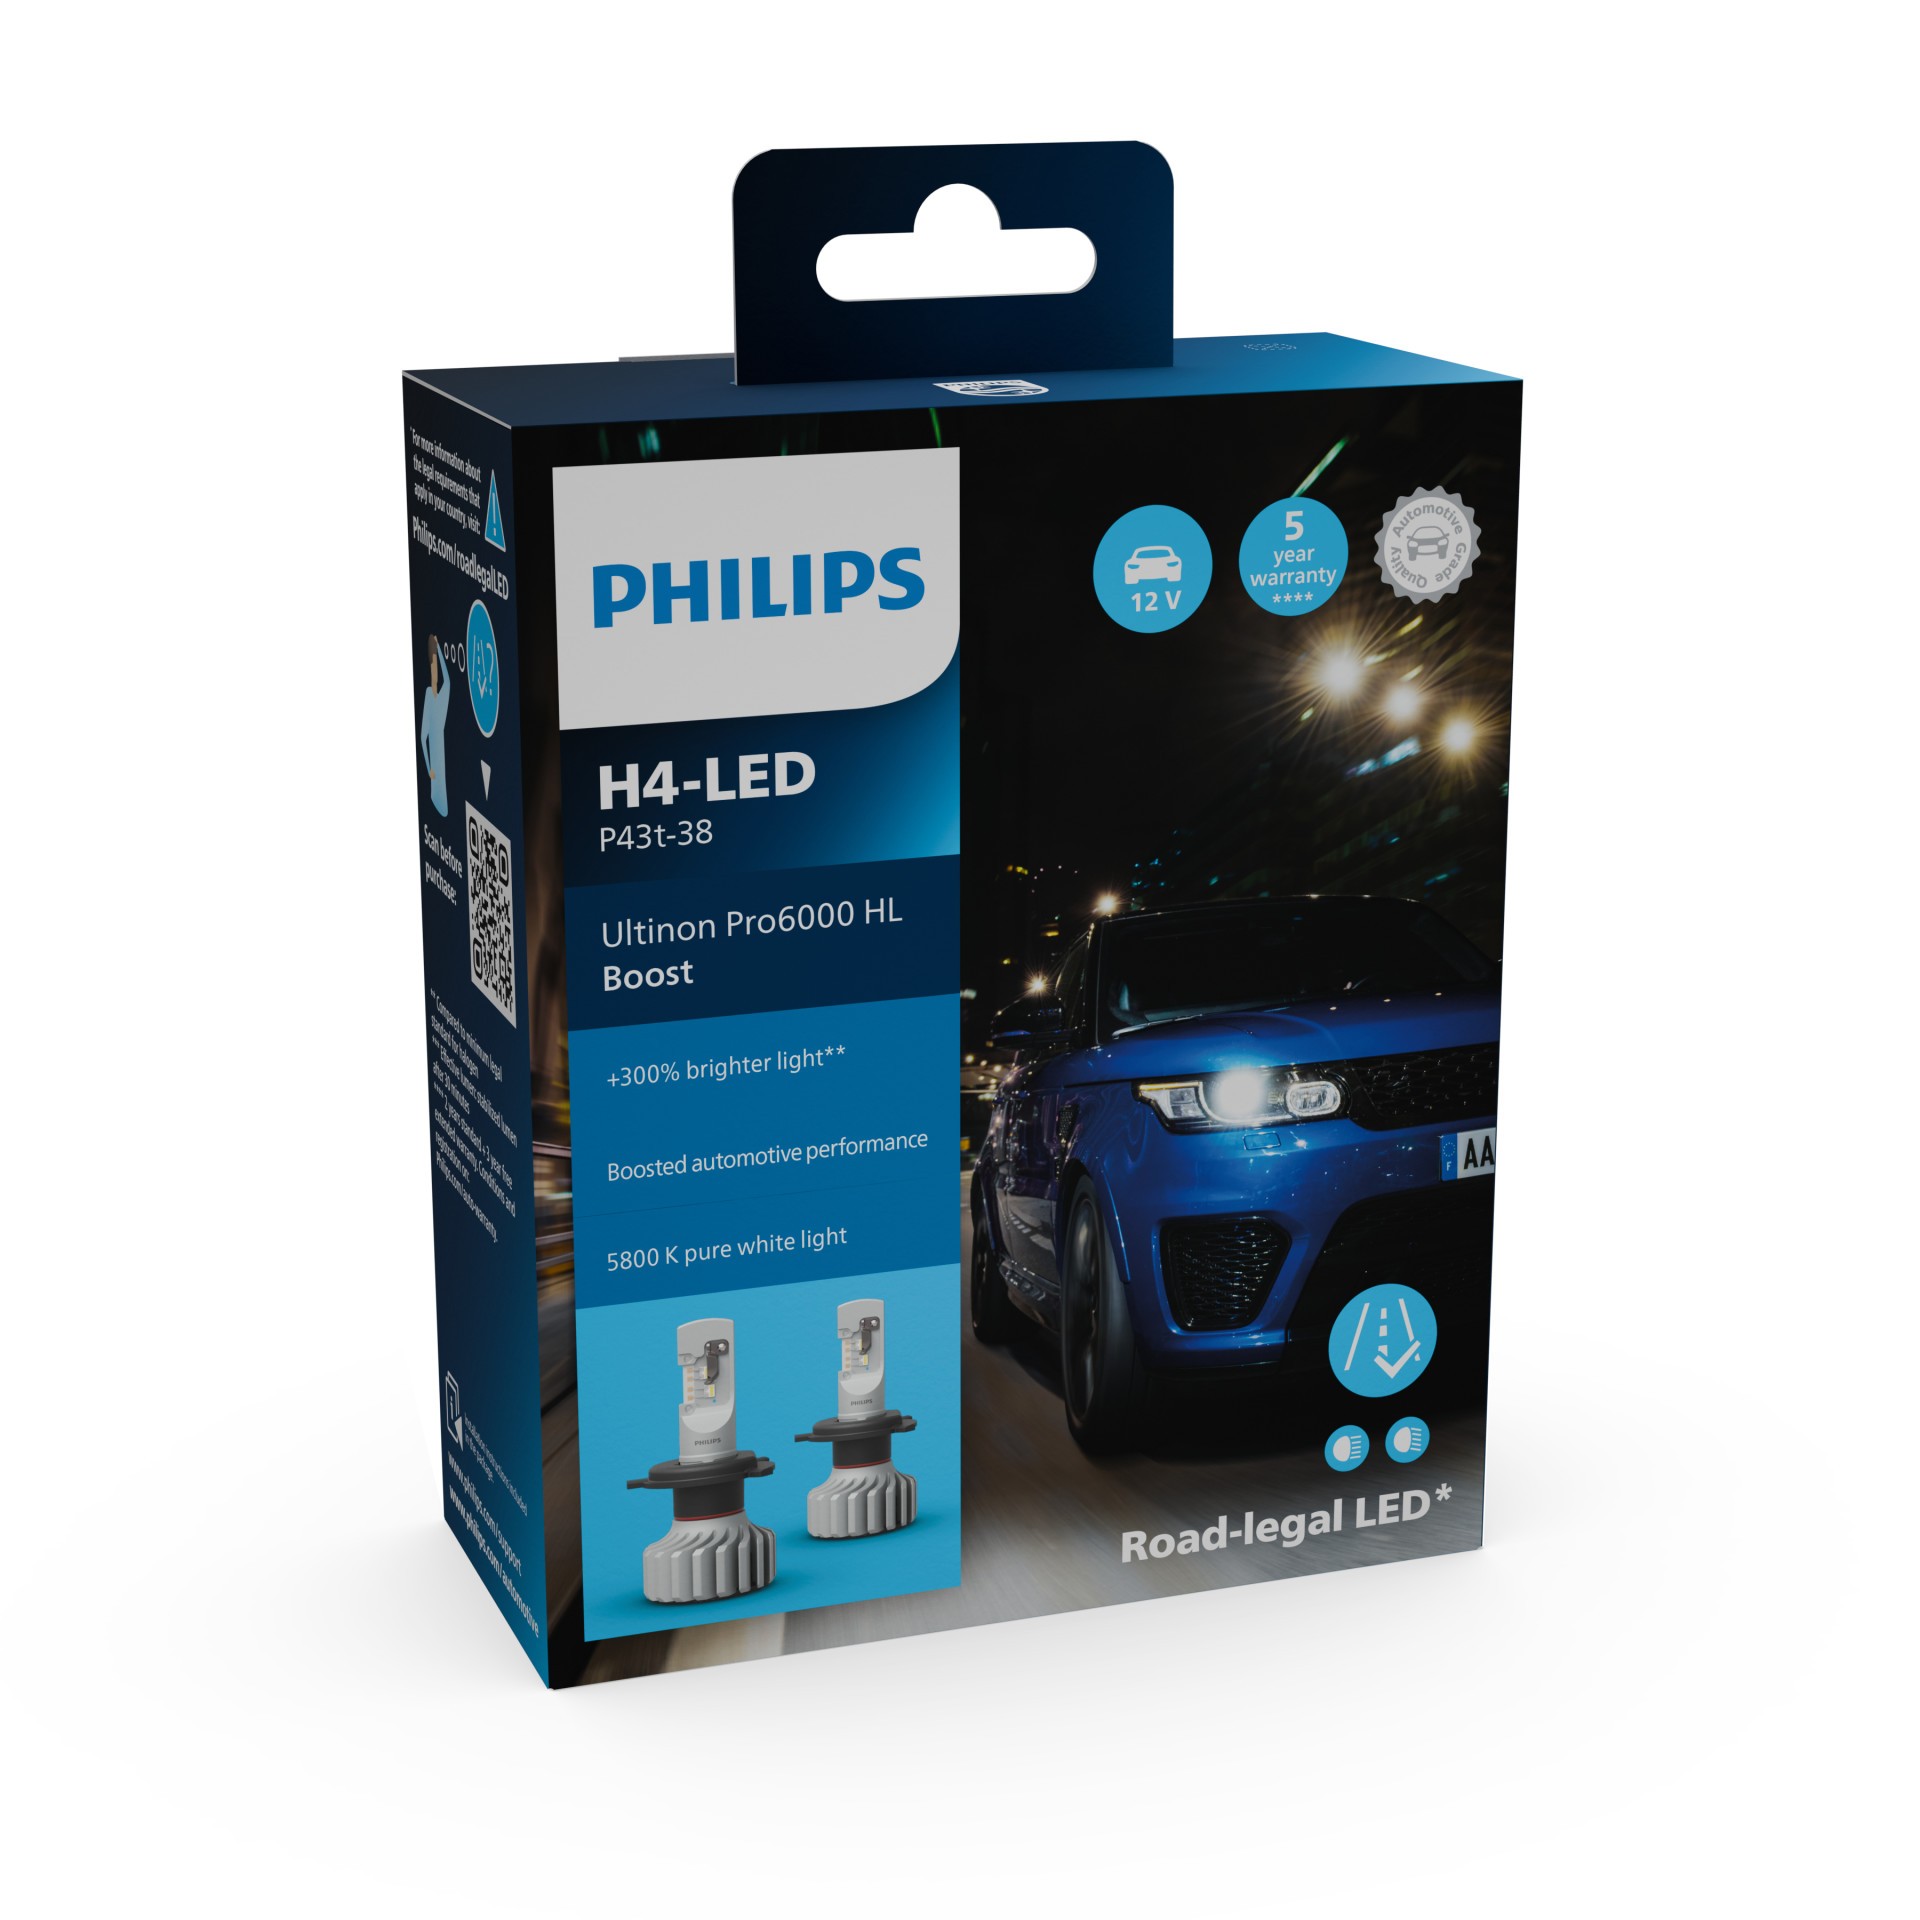 PHILIPS H4-LED Ultinon Pro6000 Boost